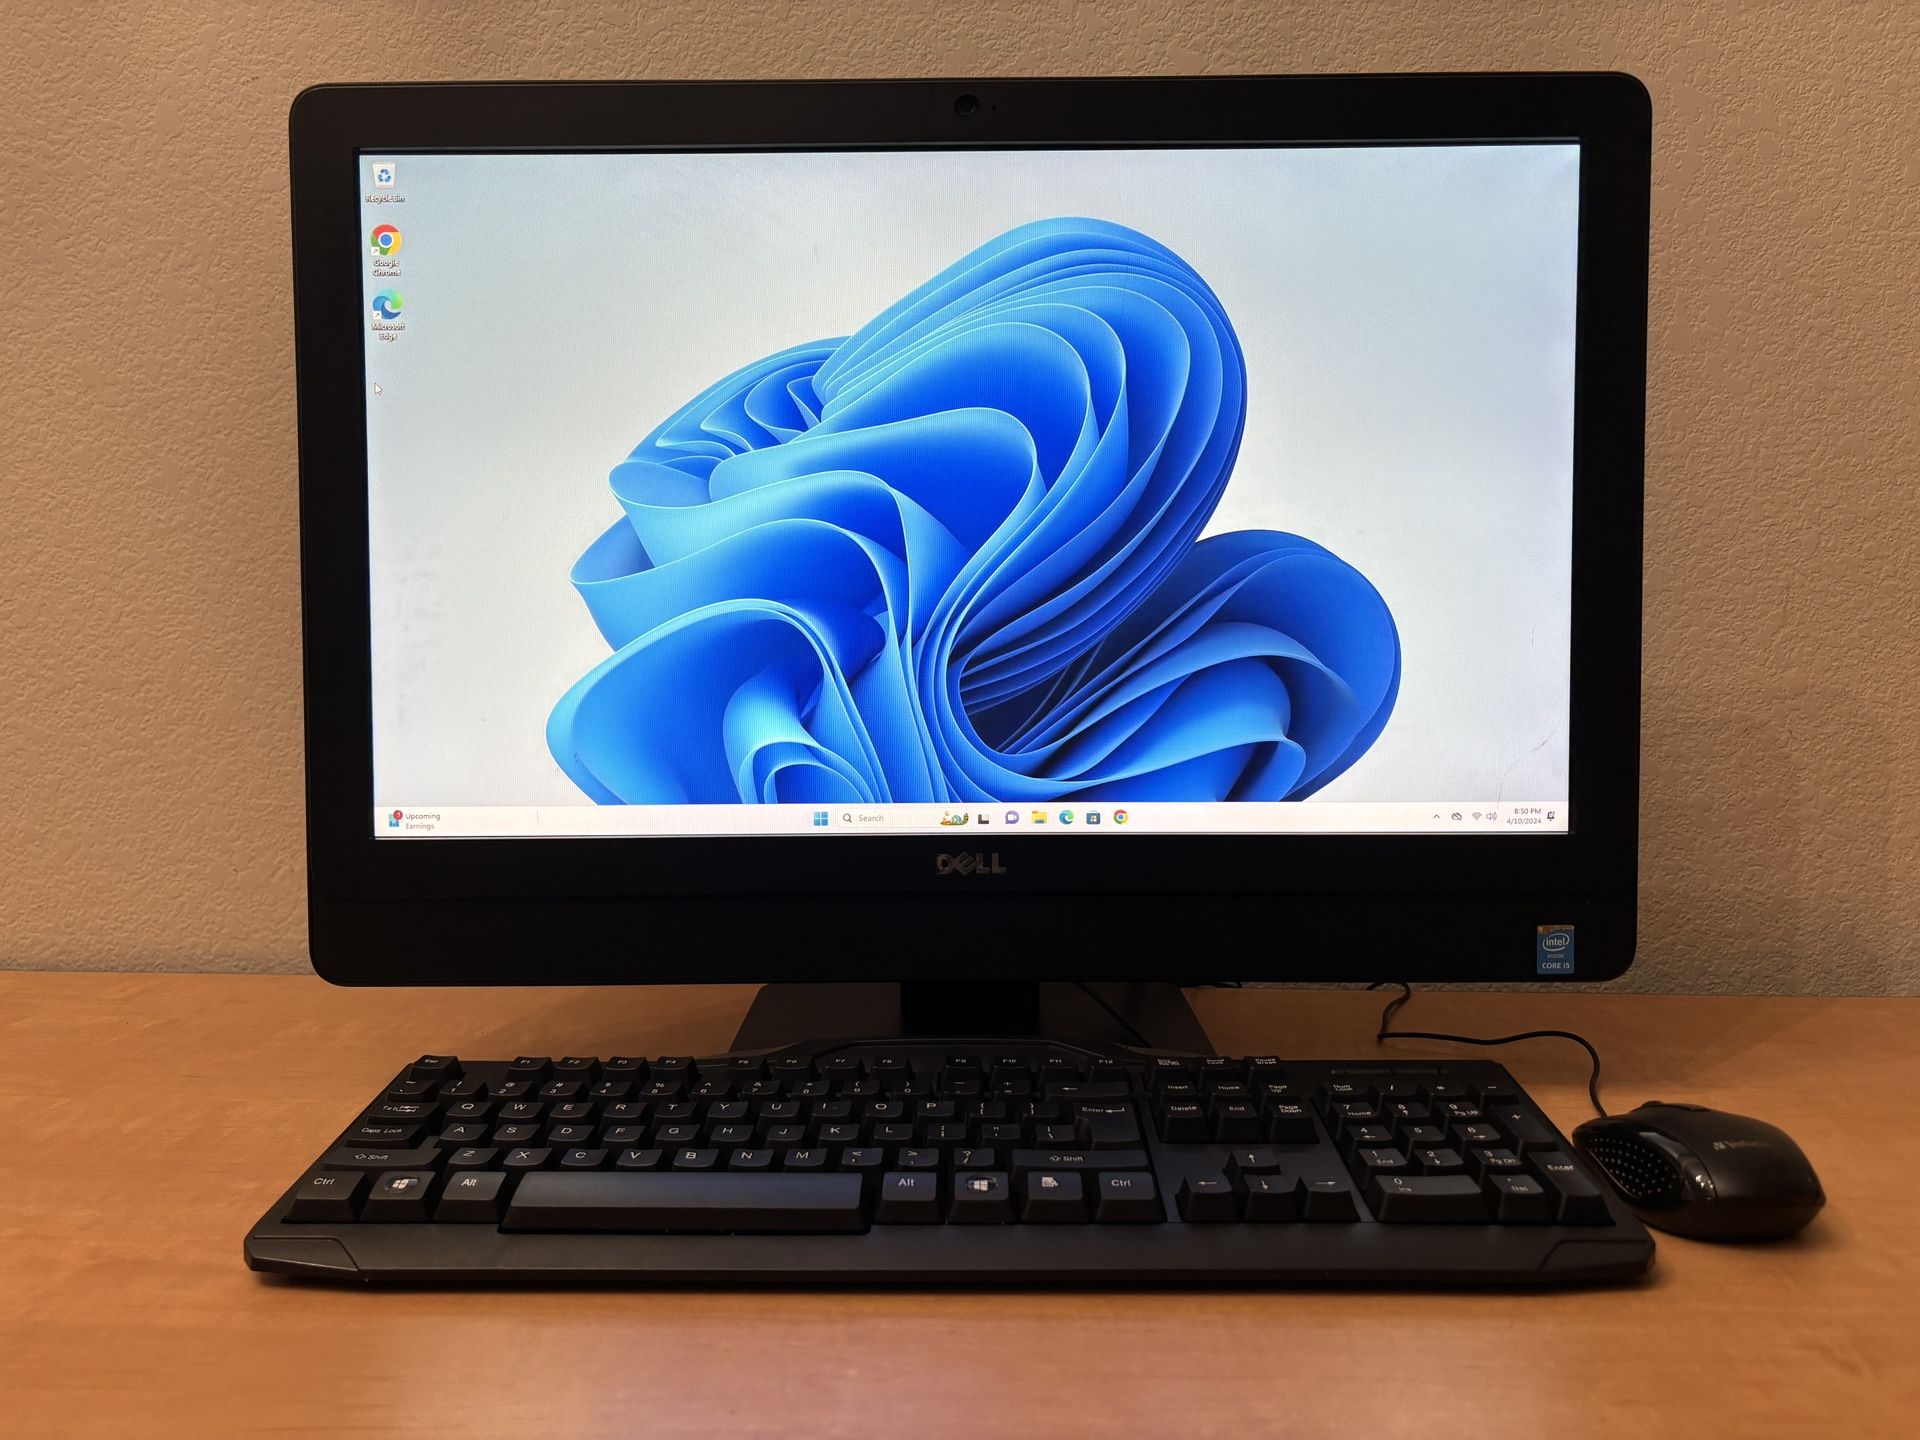 Great Fast Dell All-in-one Desktop. $250